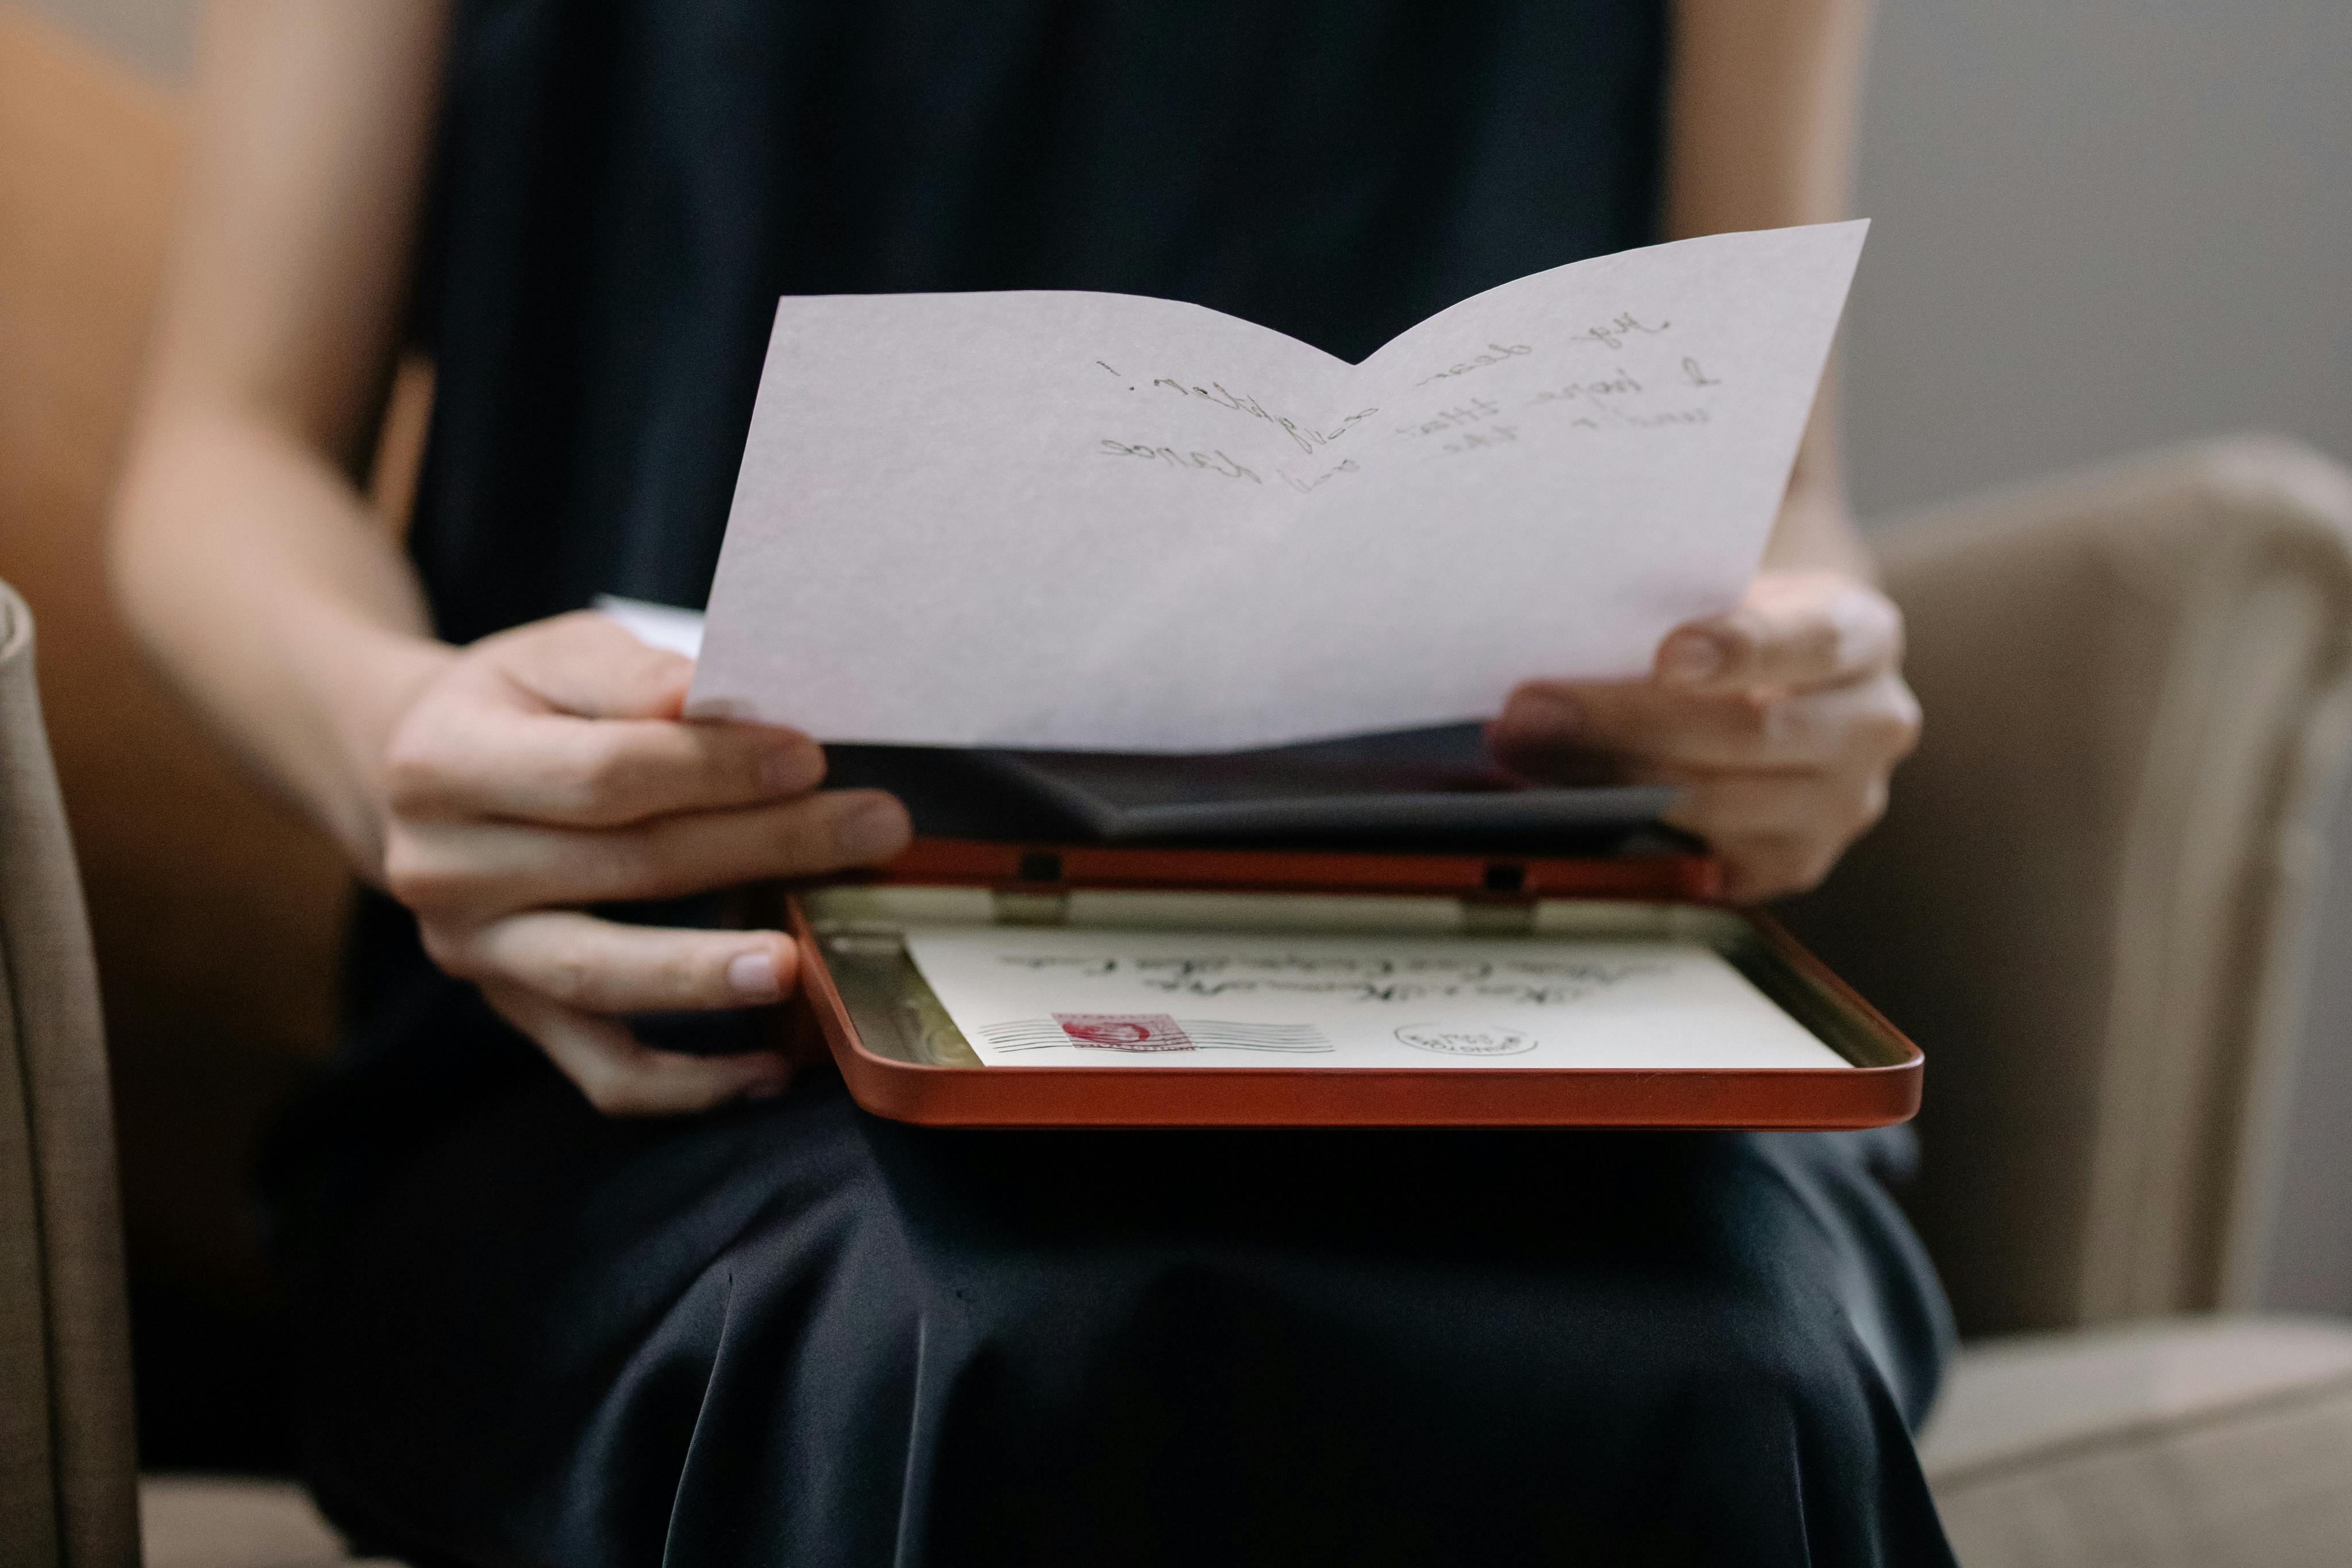 A woman reading a note | Source: Pexels